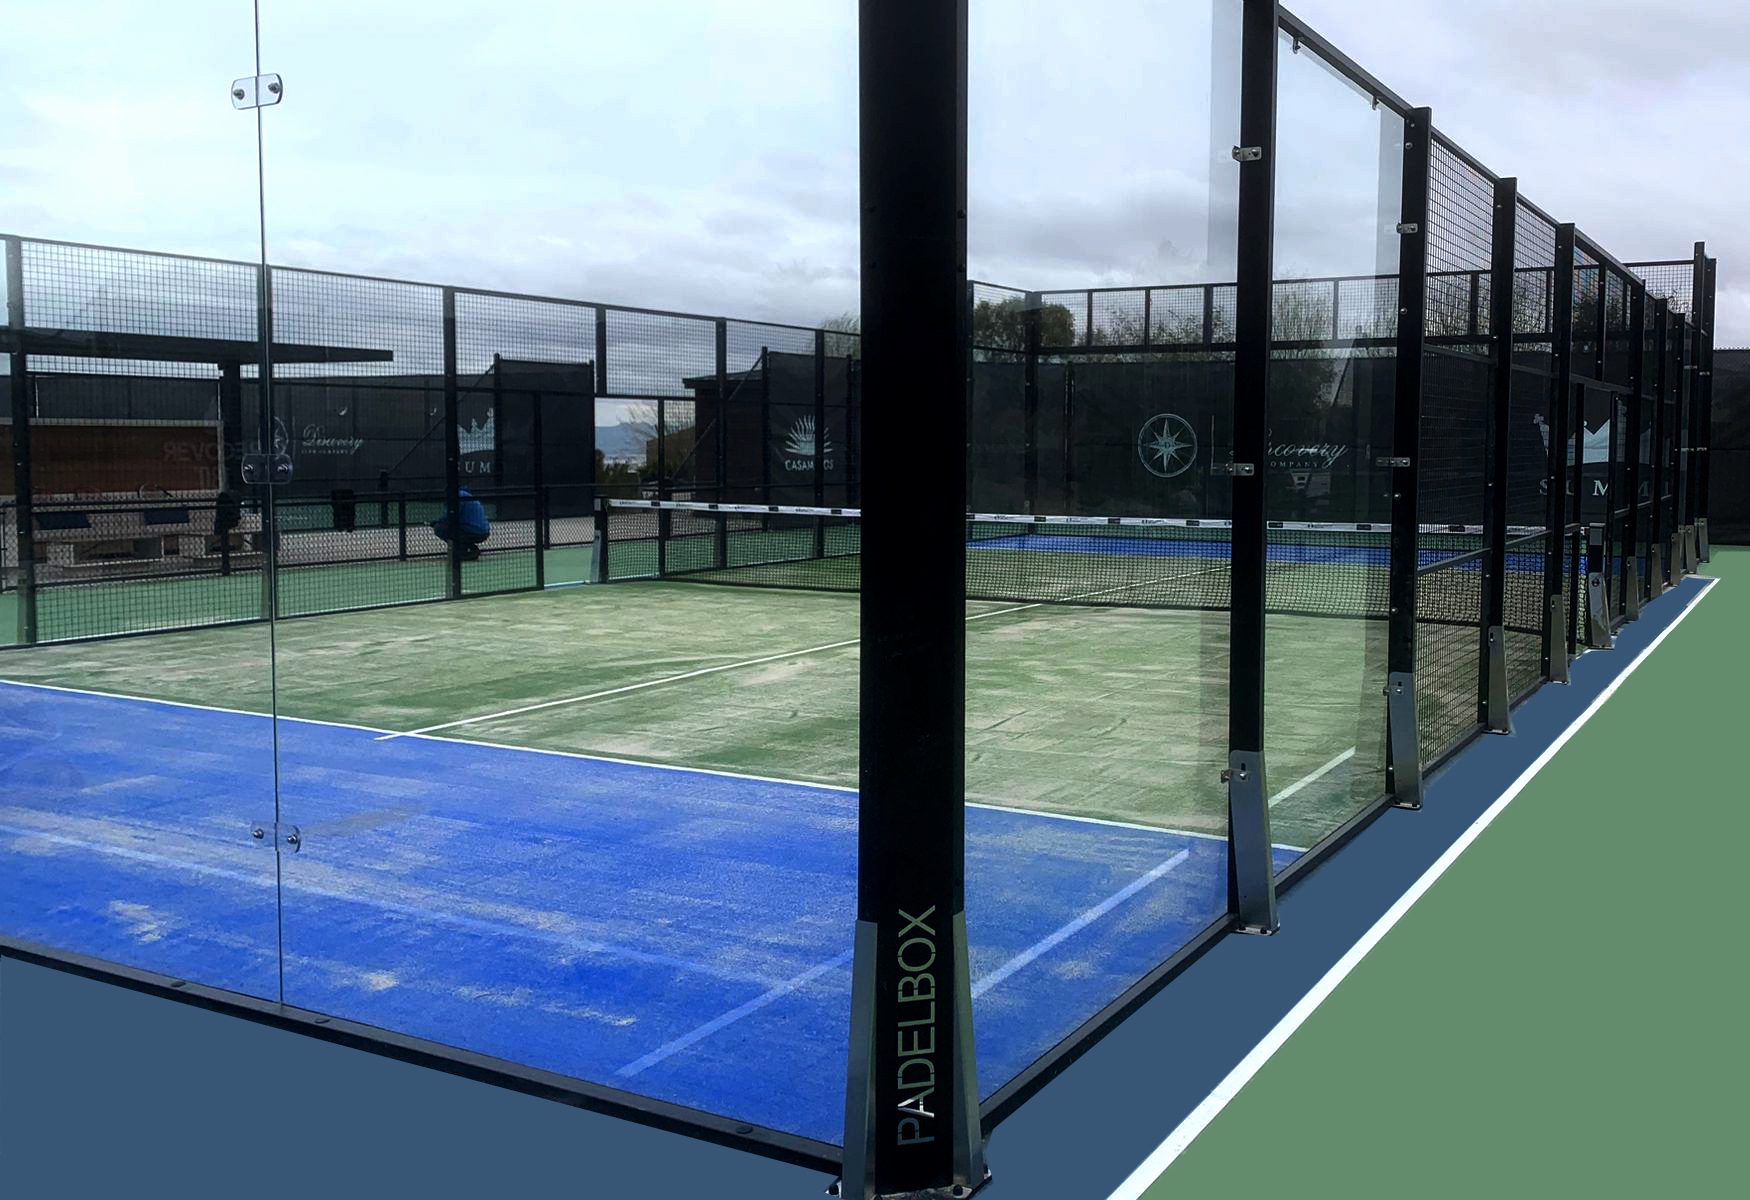 Padel in the USA PADEL BOX COURTS IN THE USA